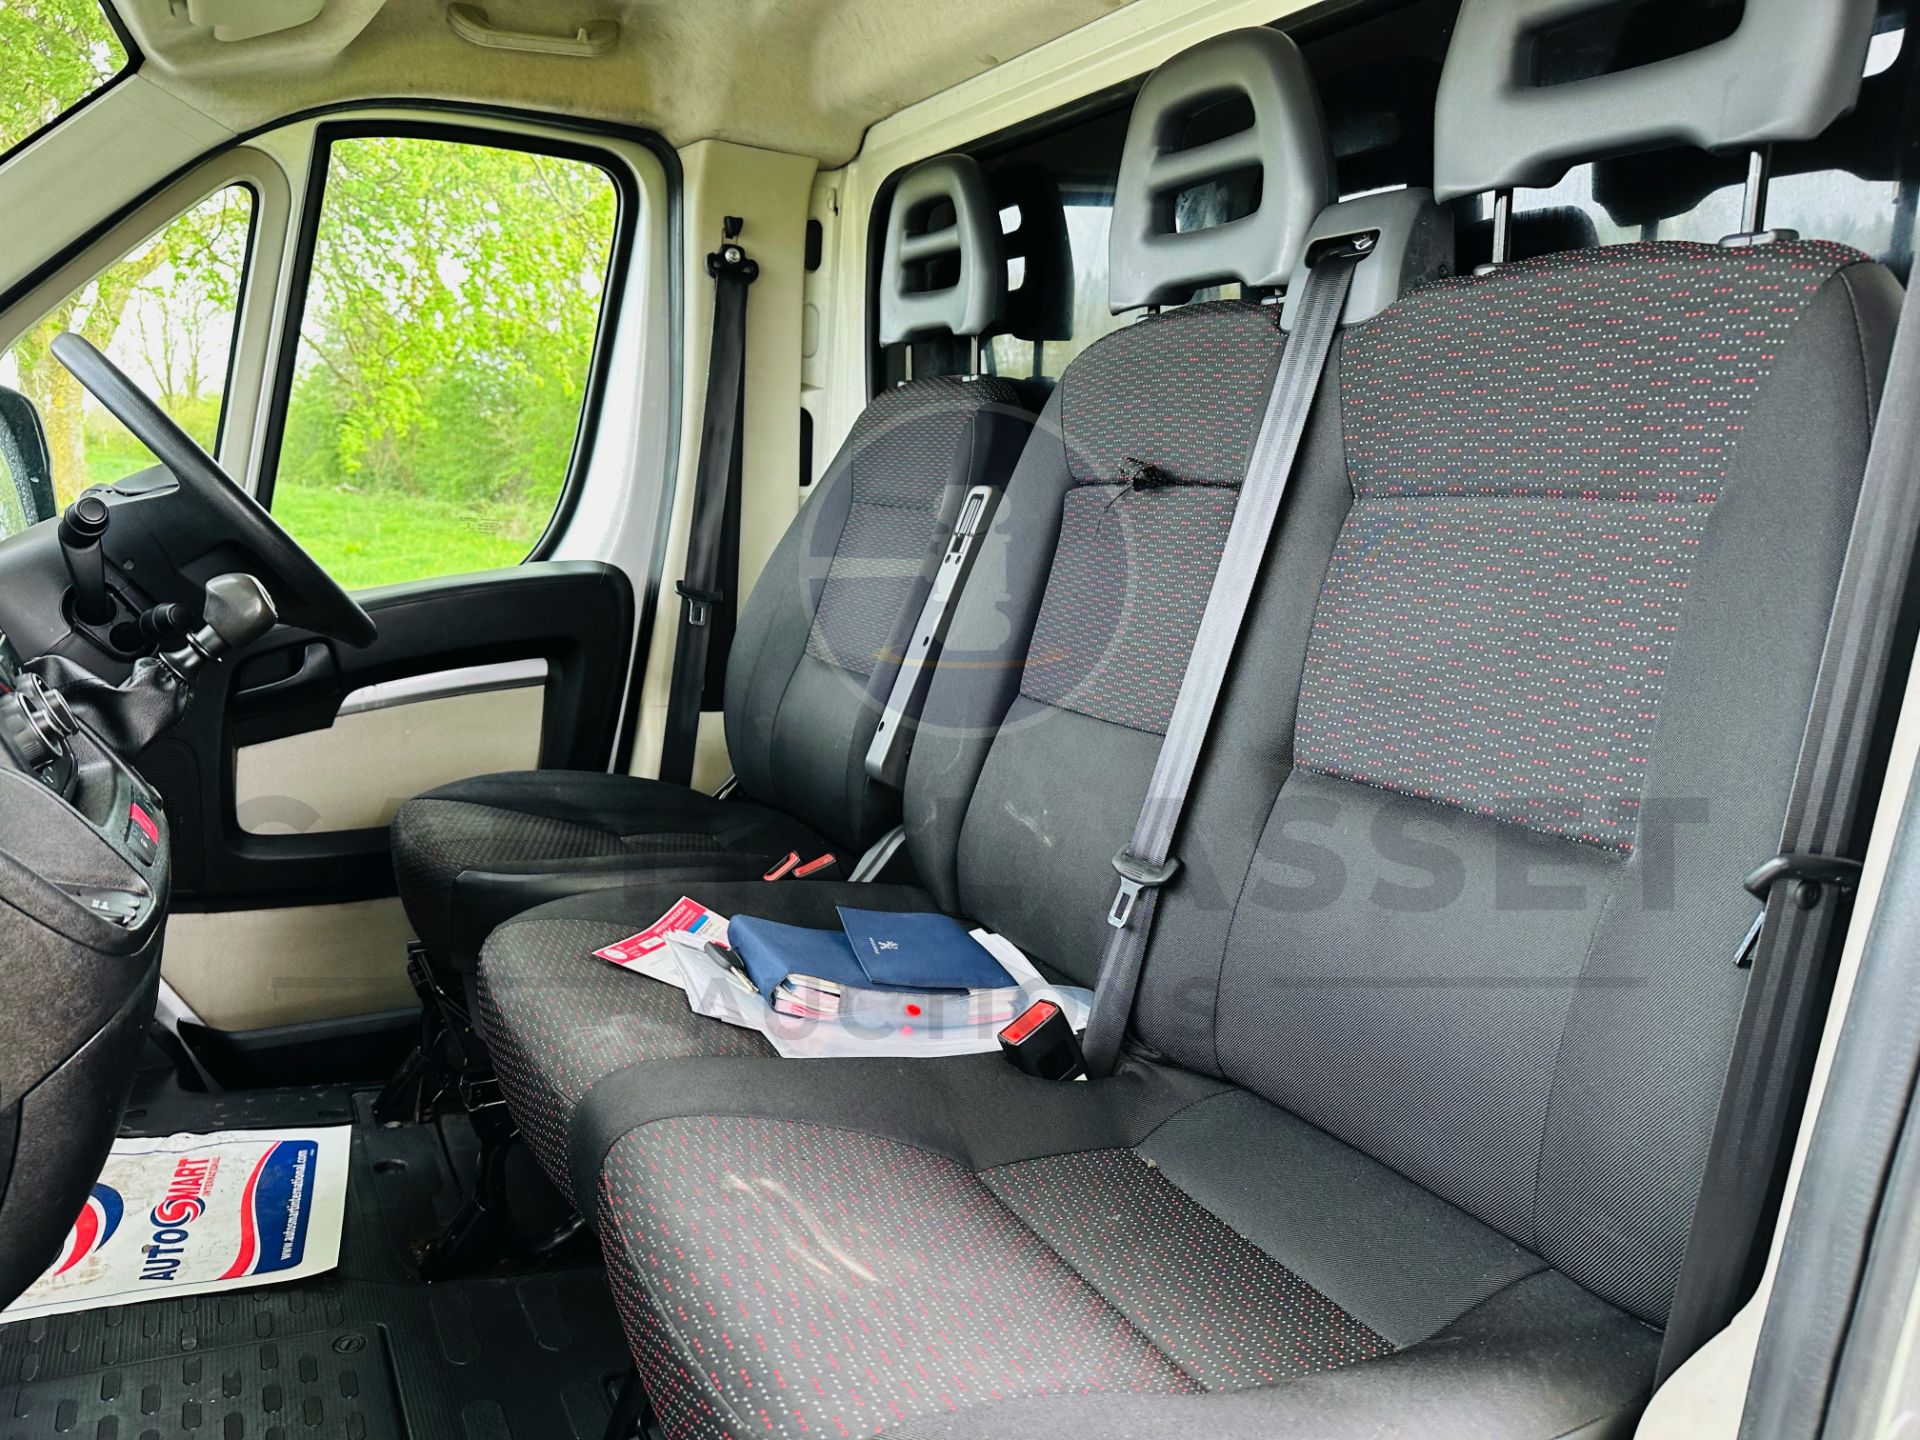 (ON SALE) PEUGEOT BOXER 335 *LWB LOW LOADER / MAXI MOVER LUTON* (2019 - EURO 6) 2.0 BLUE HDI *A/C* - Image 14 of 27